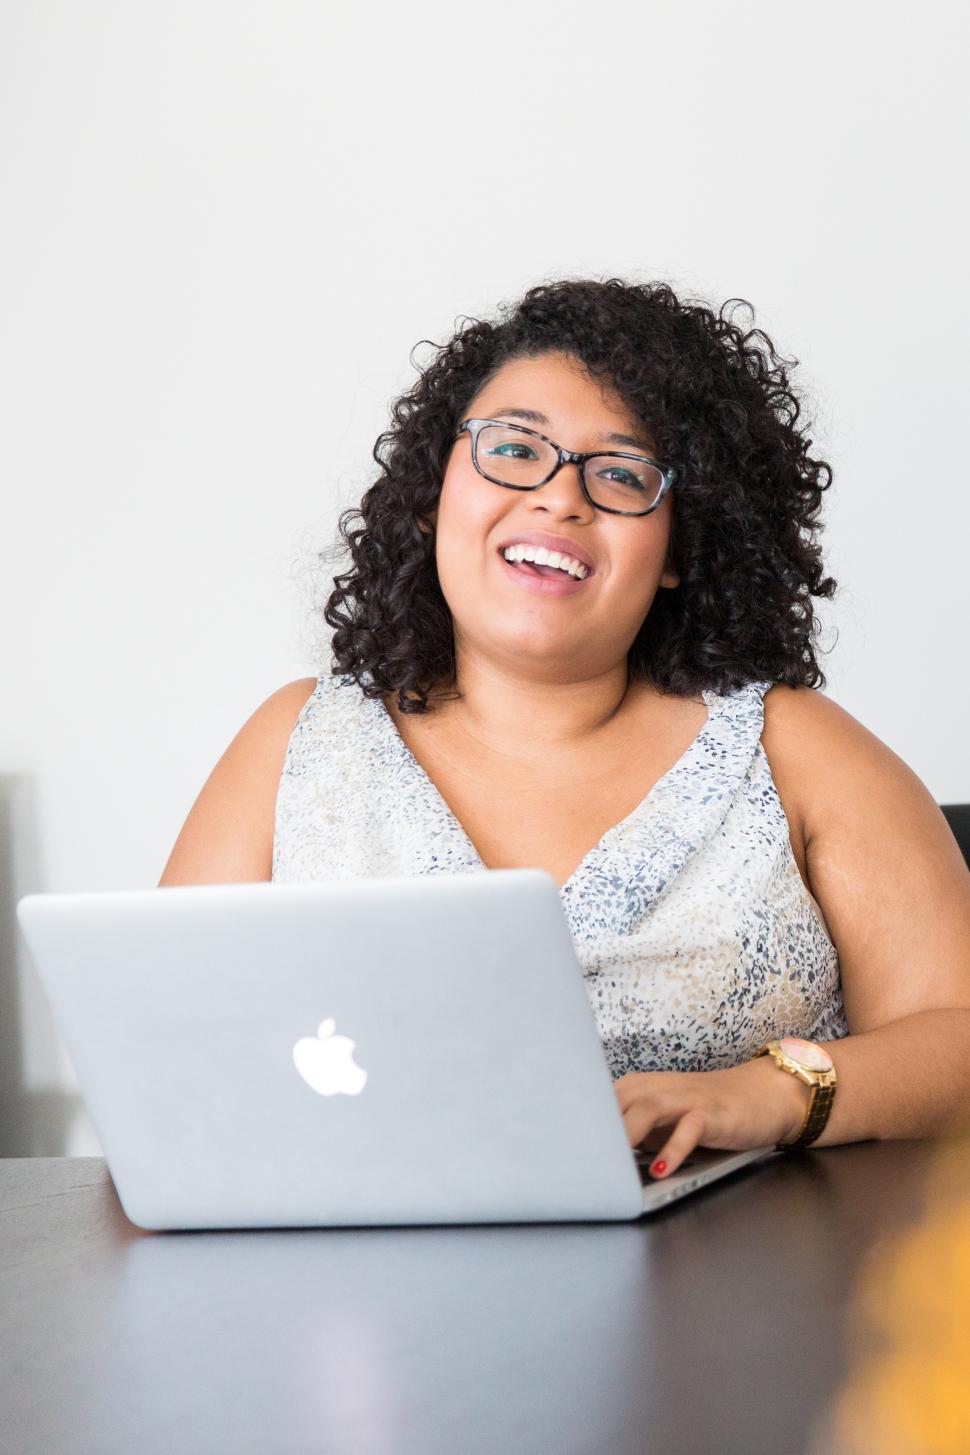 Free Image of Happy woman with curly hair sitting with laptop in office 